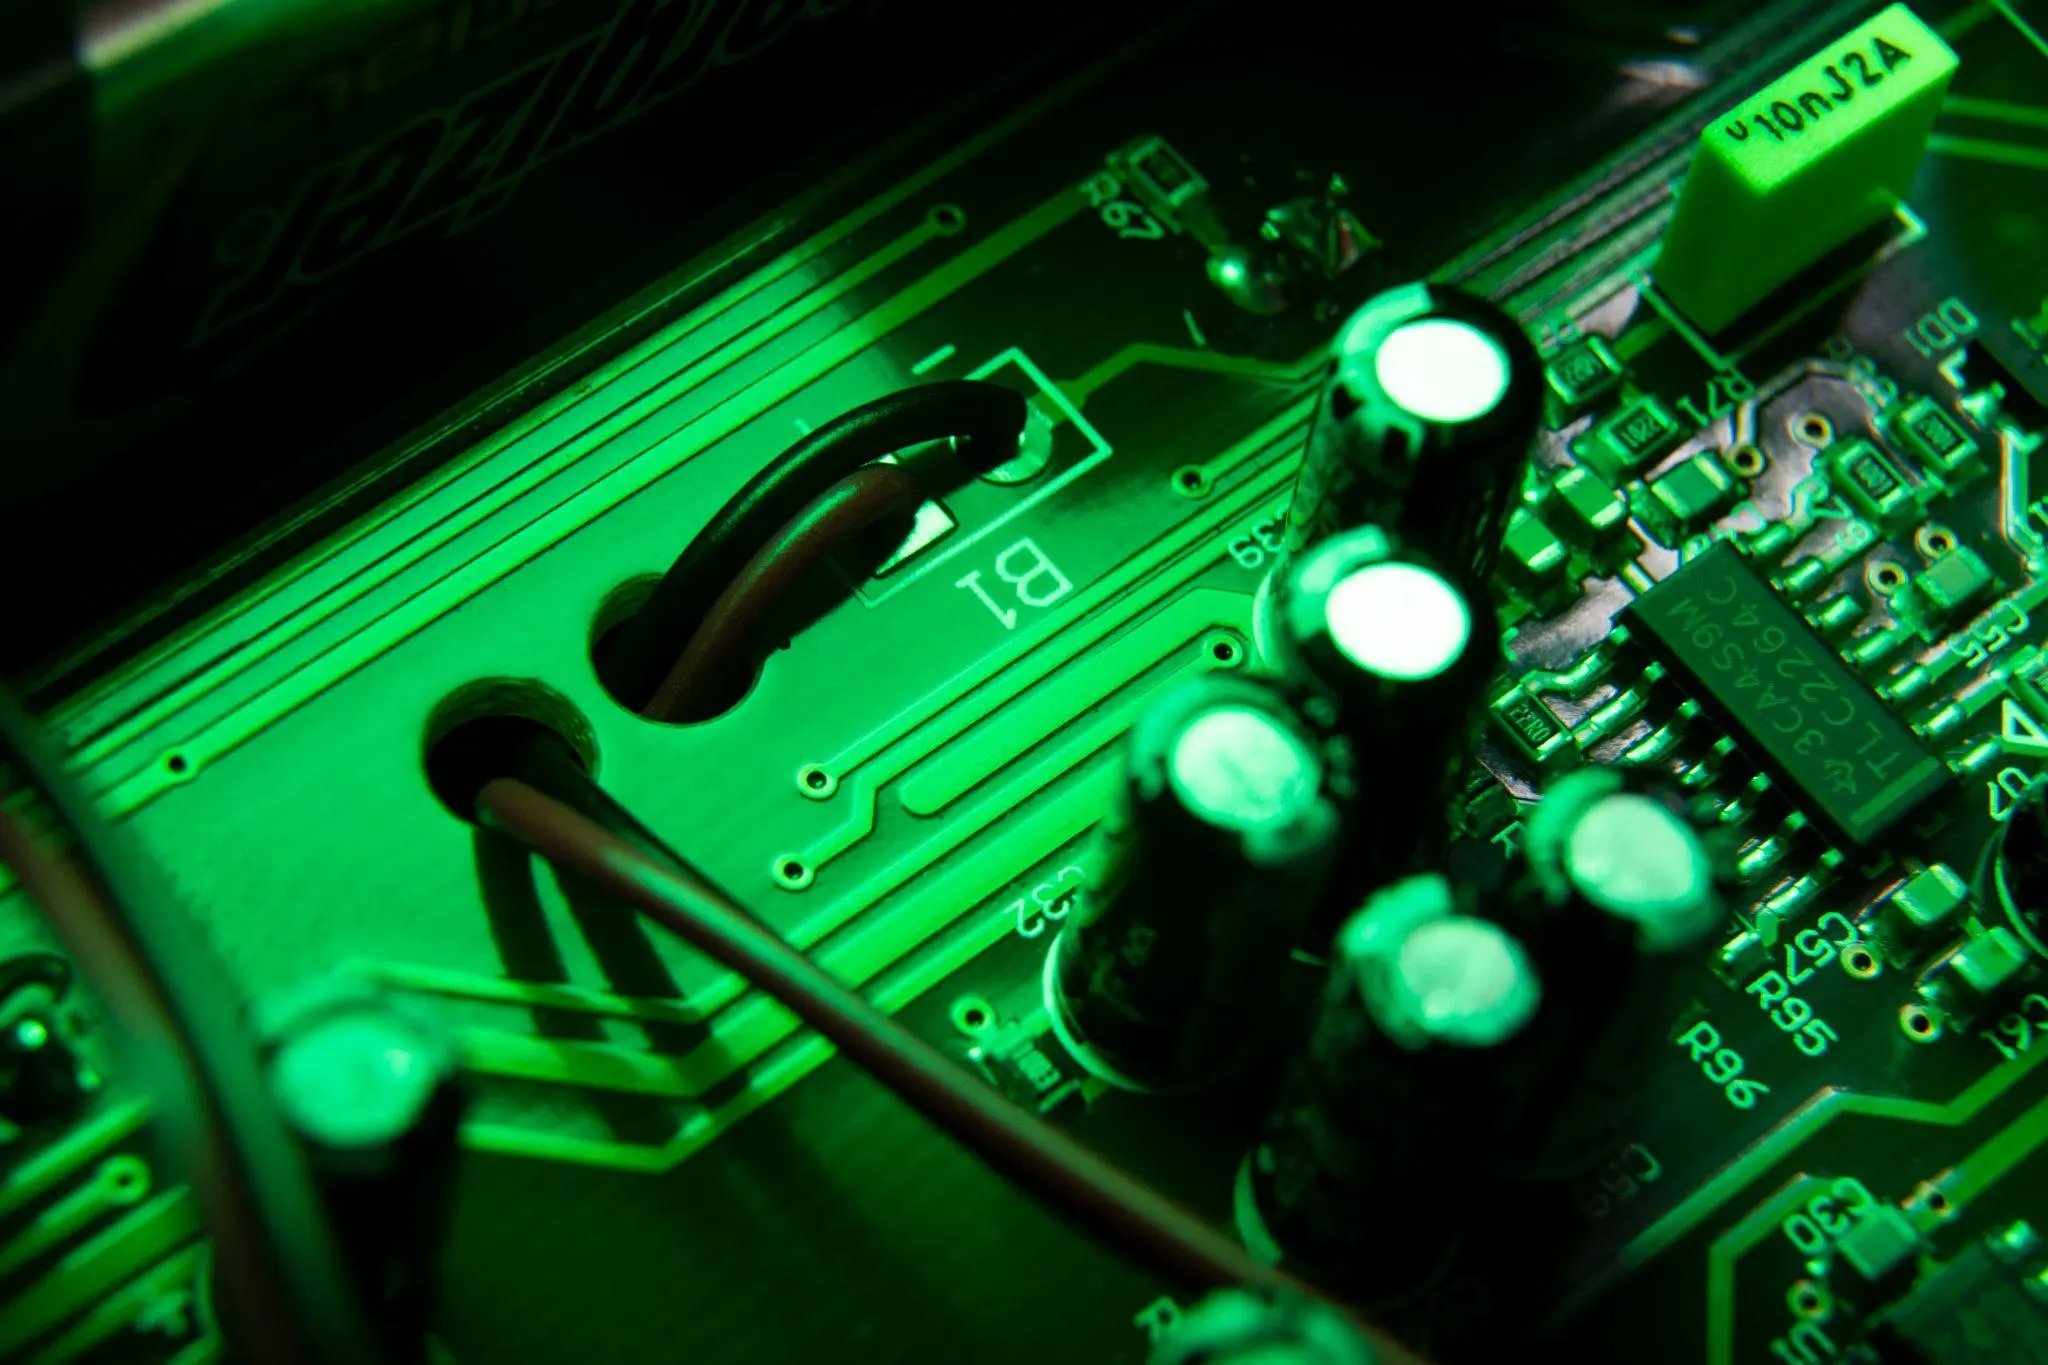 Circuit board close-up with different components